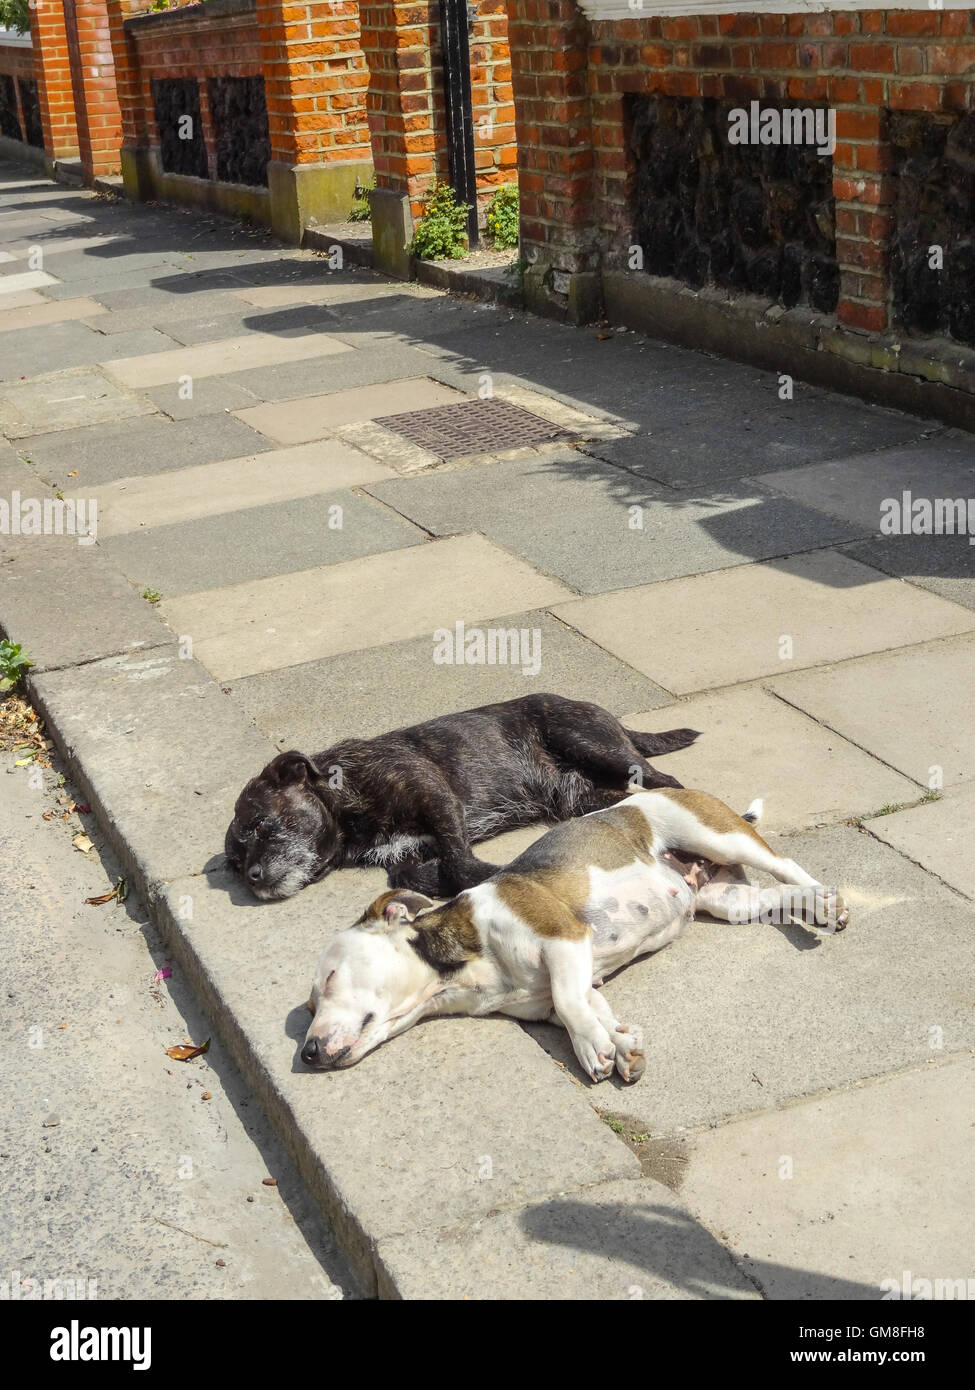 Let sleeping dogs lie - two dogs relaxing and sleeping on the pavement in the heat of the day Stock Photo